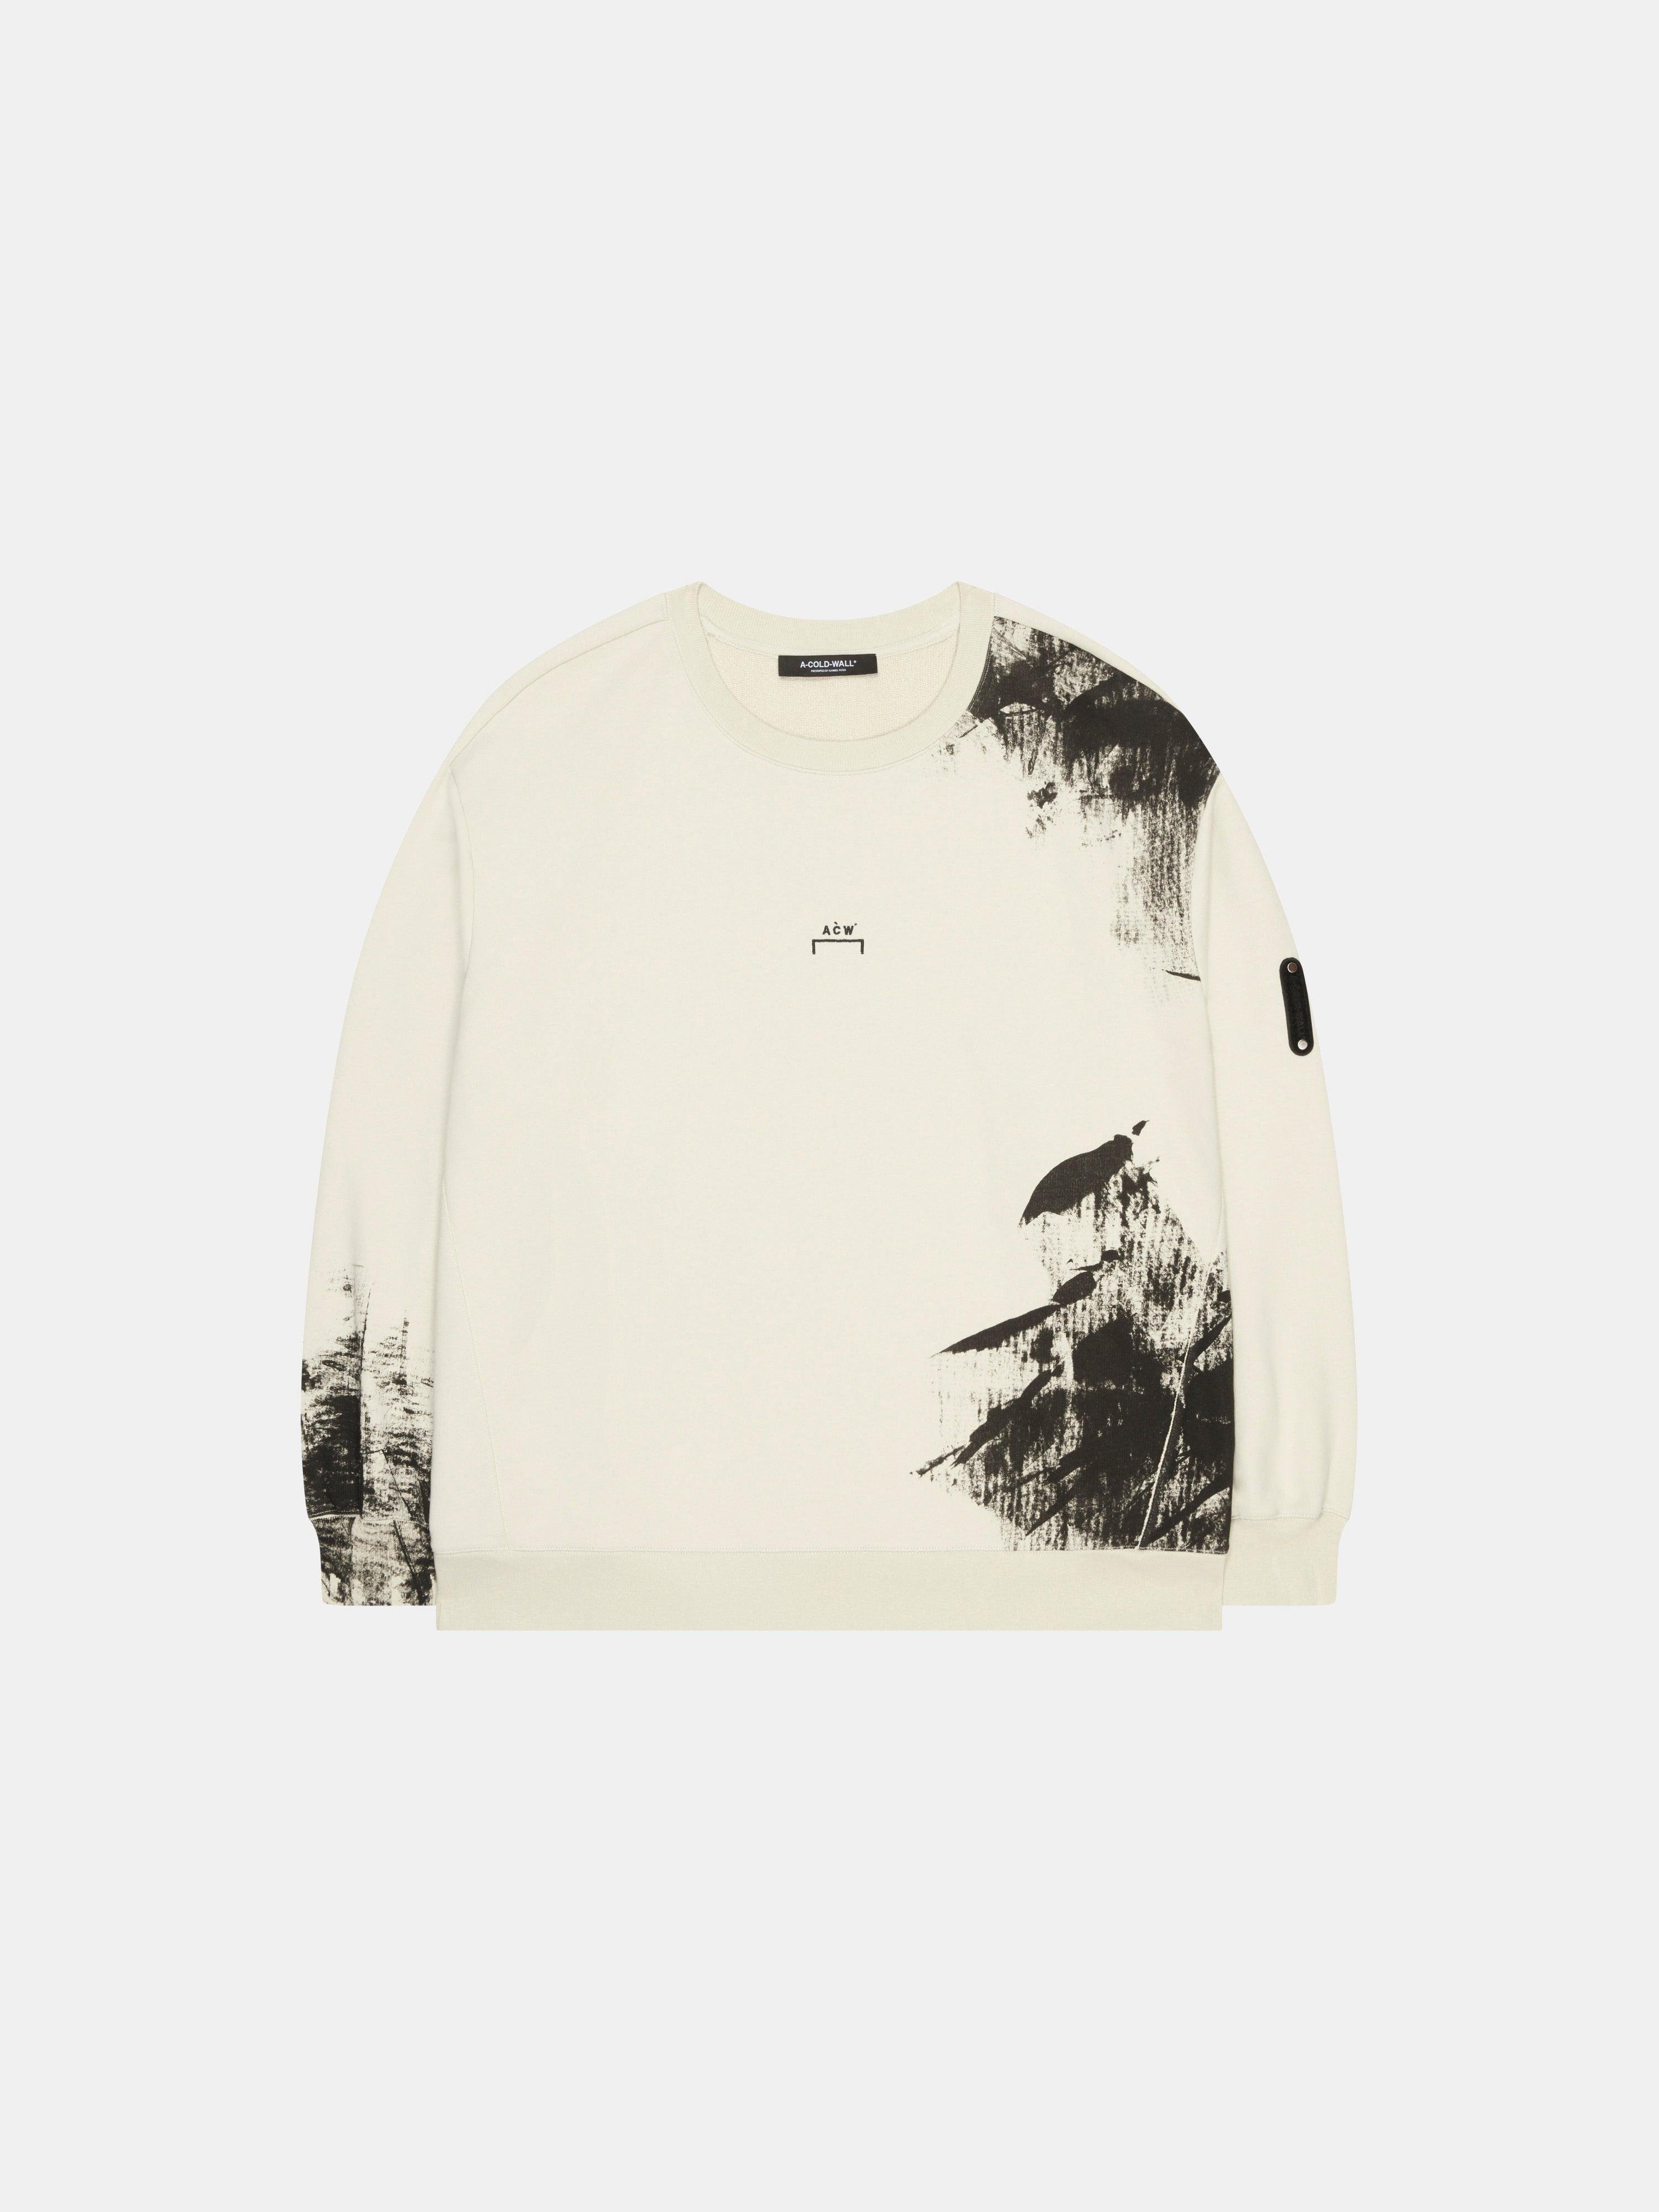 Brushstroke Crewneck by A-COLD-WALL*